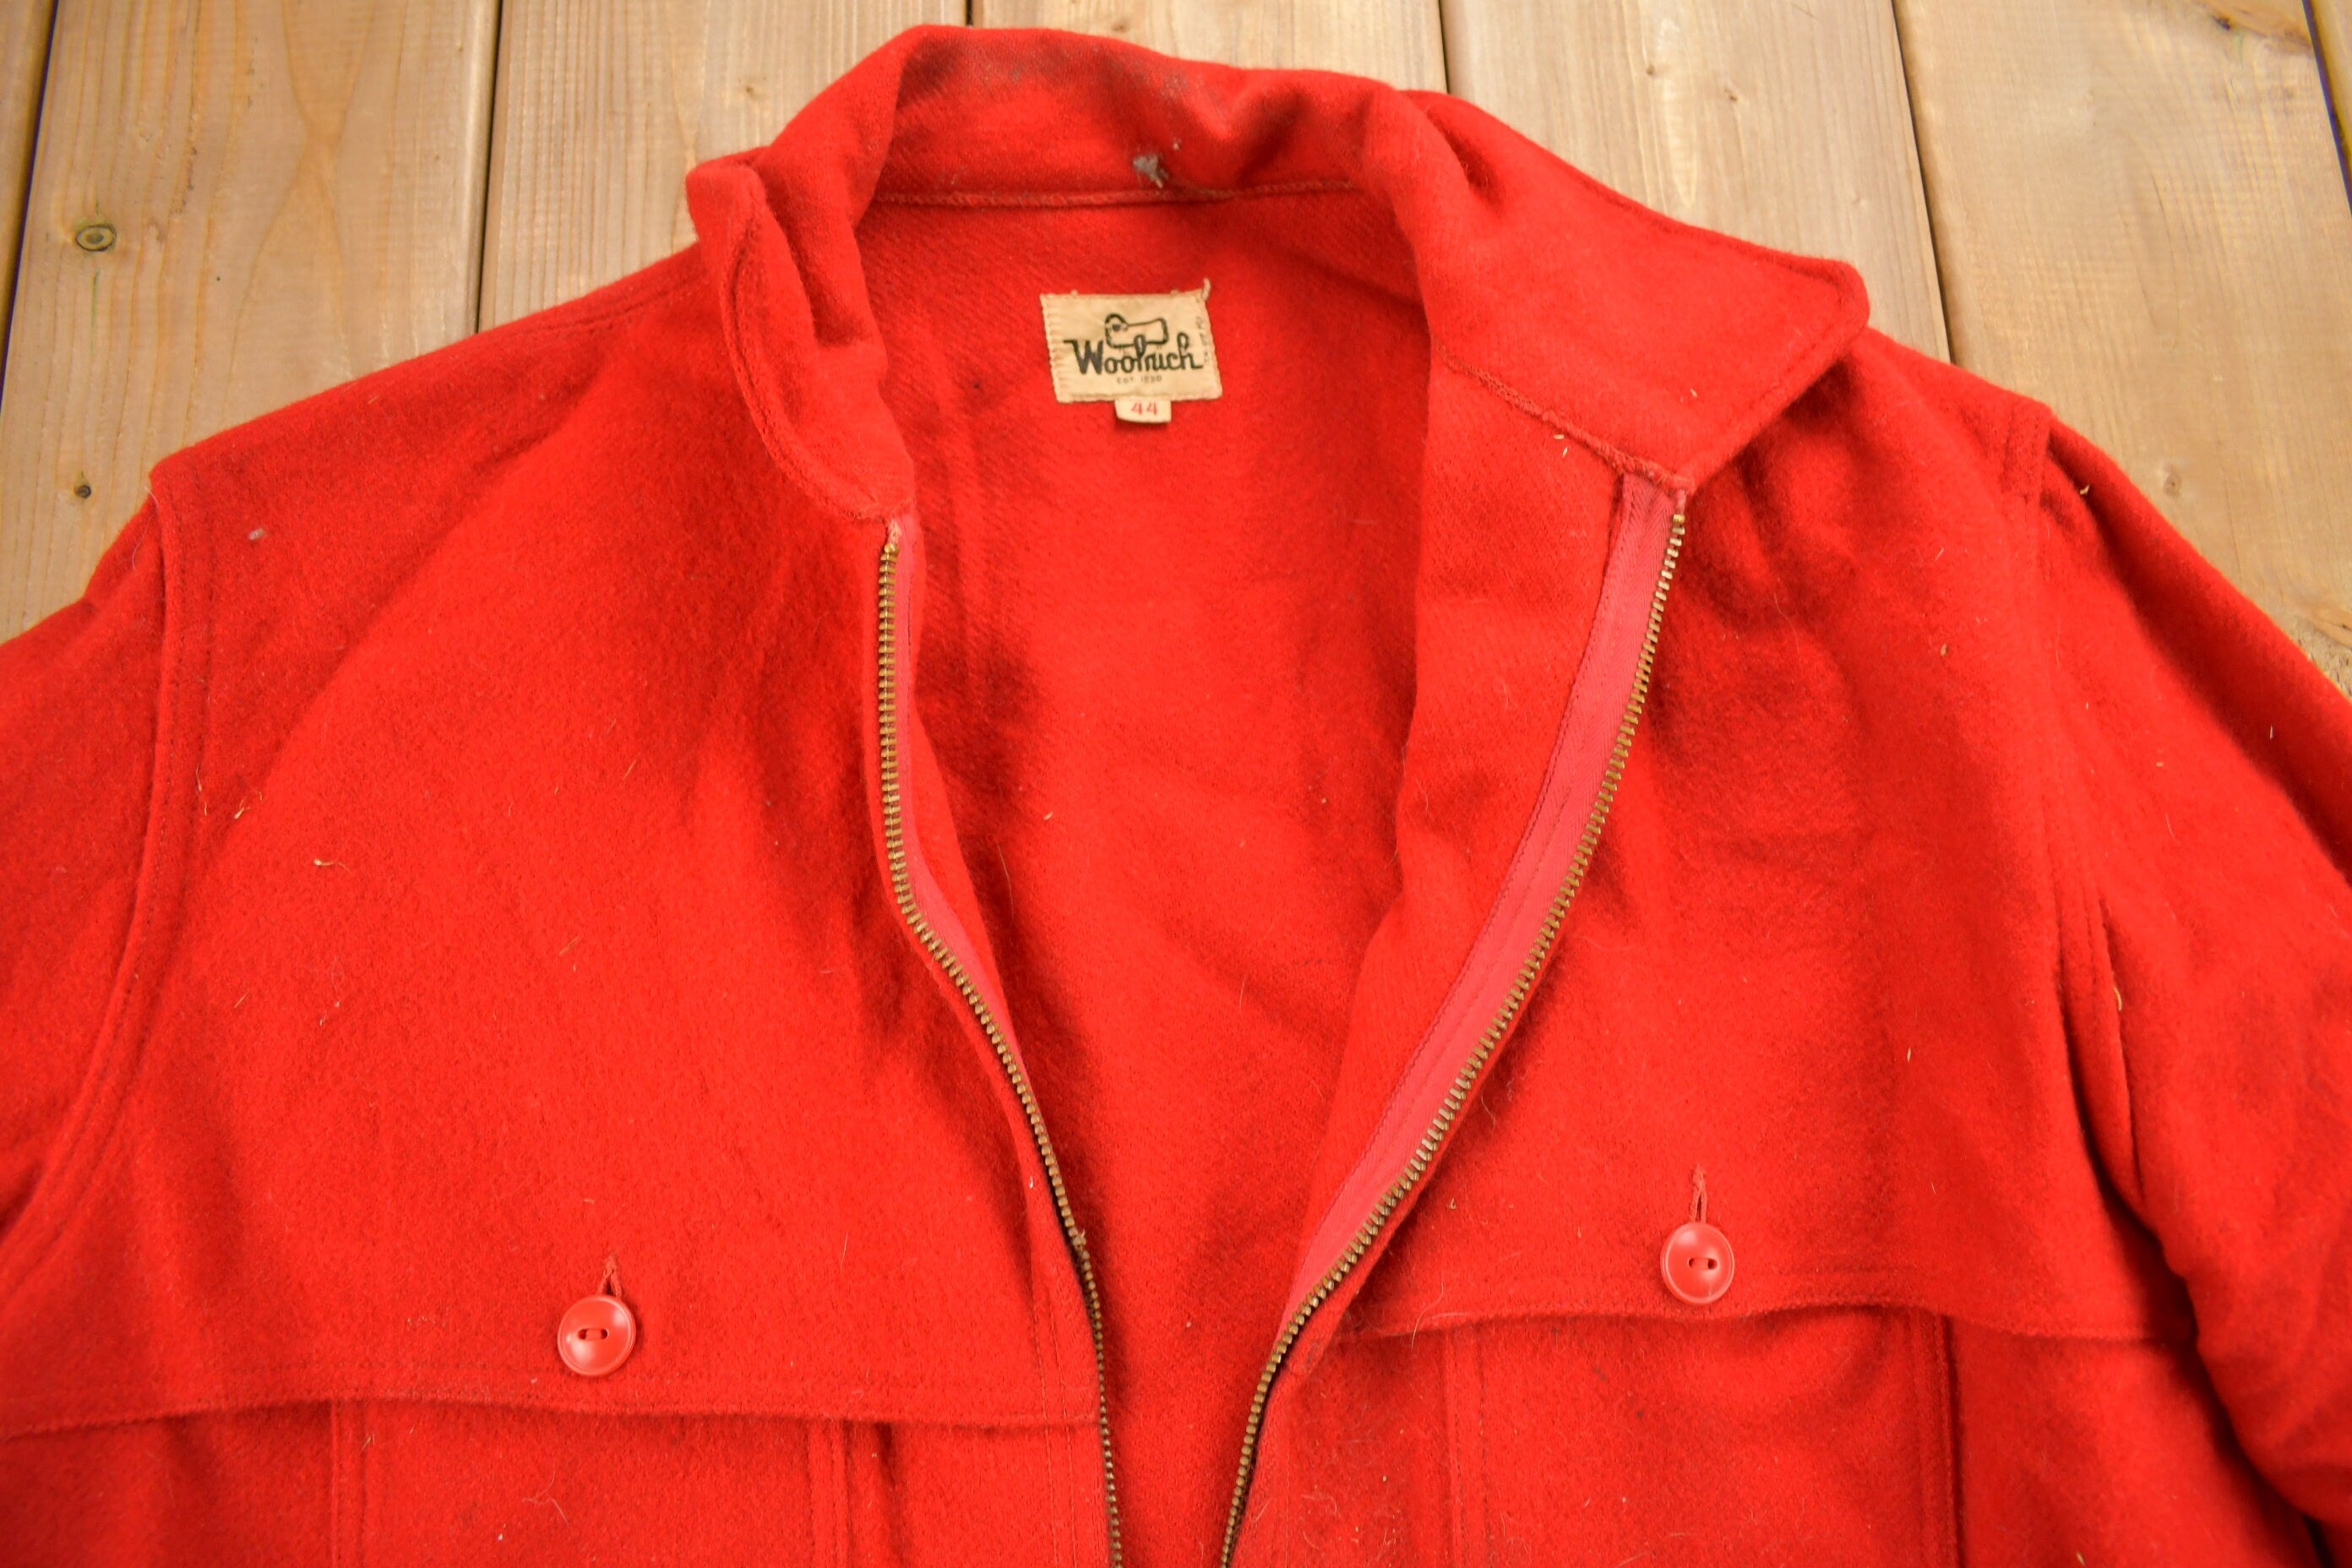 Vintage 1960s Woolrich Red Wool Jacket / Vintage Woolrich / Made In USA /  Outdoorsman / Hunting Jacket / Size 44